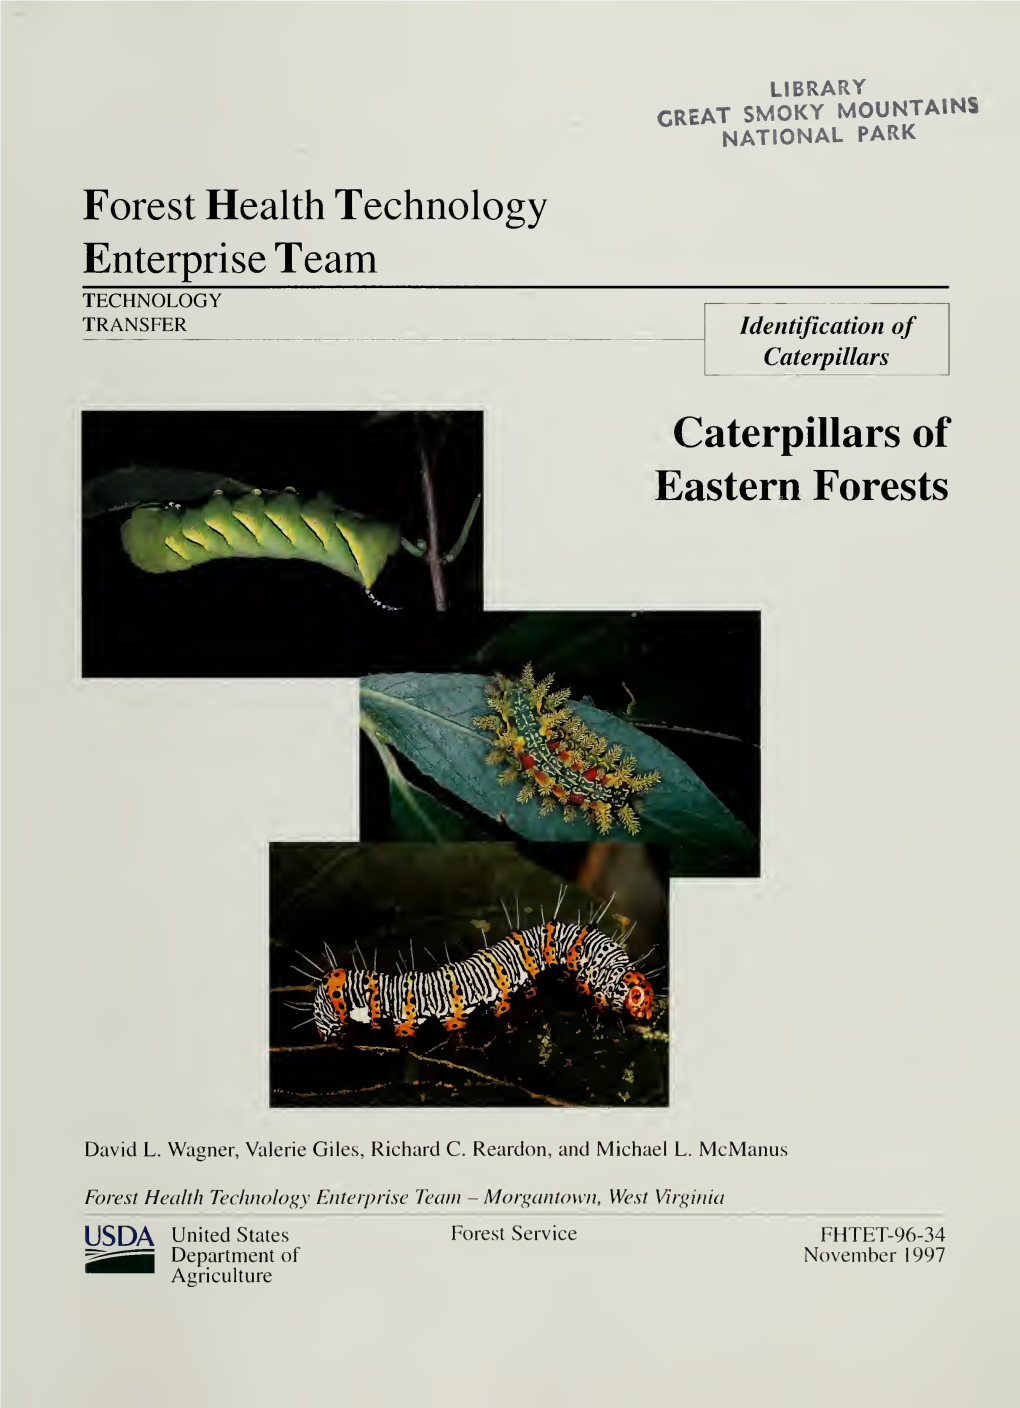 Caterpillars of Eastern Forests